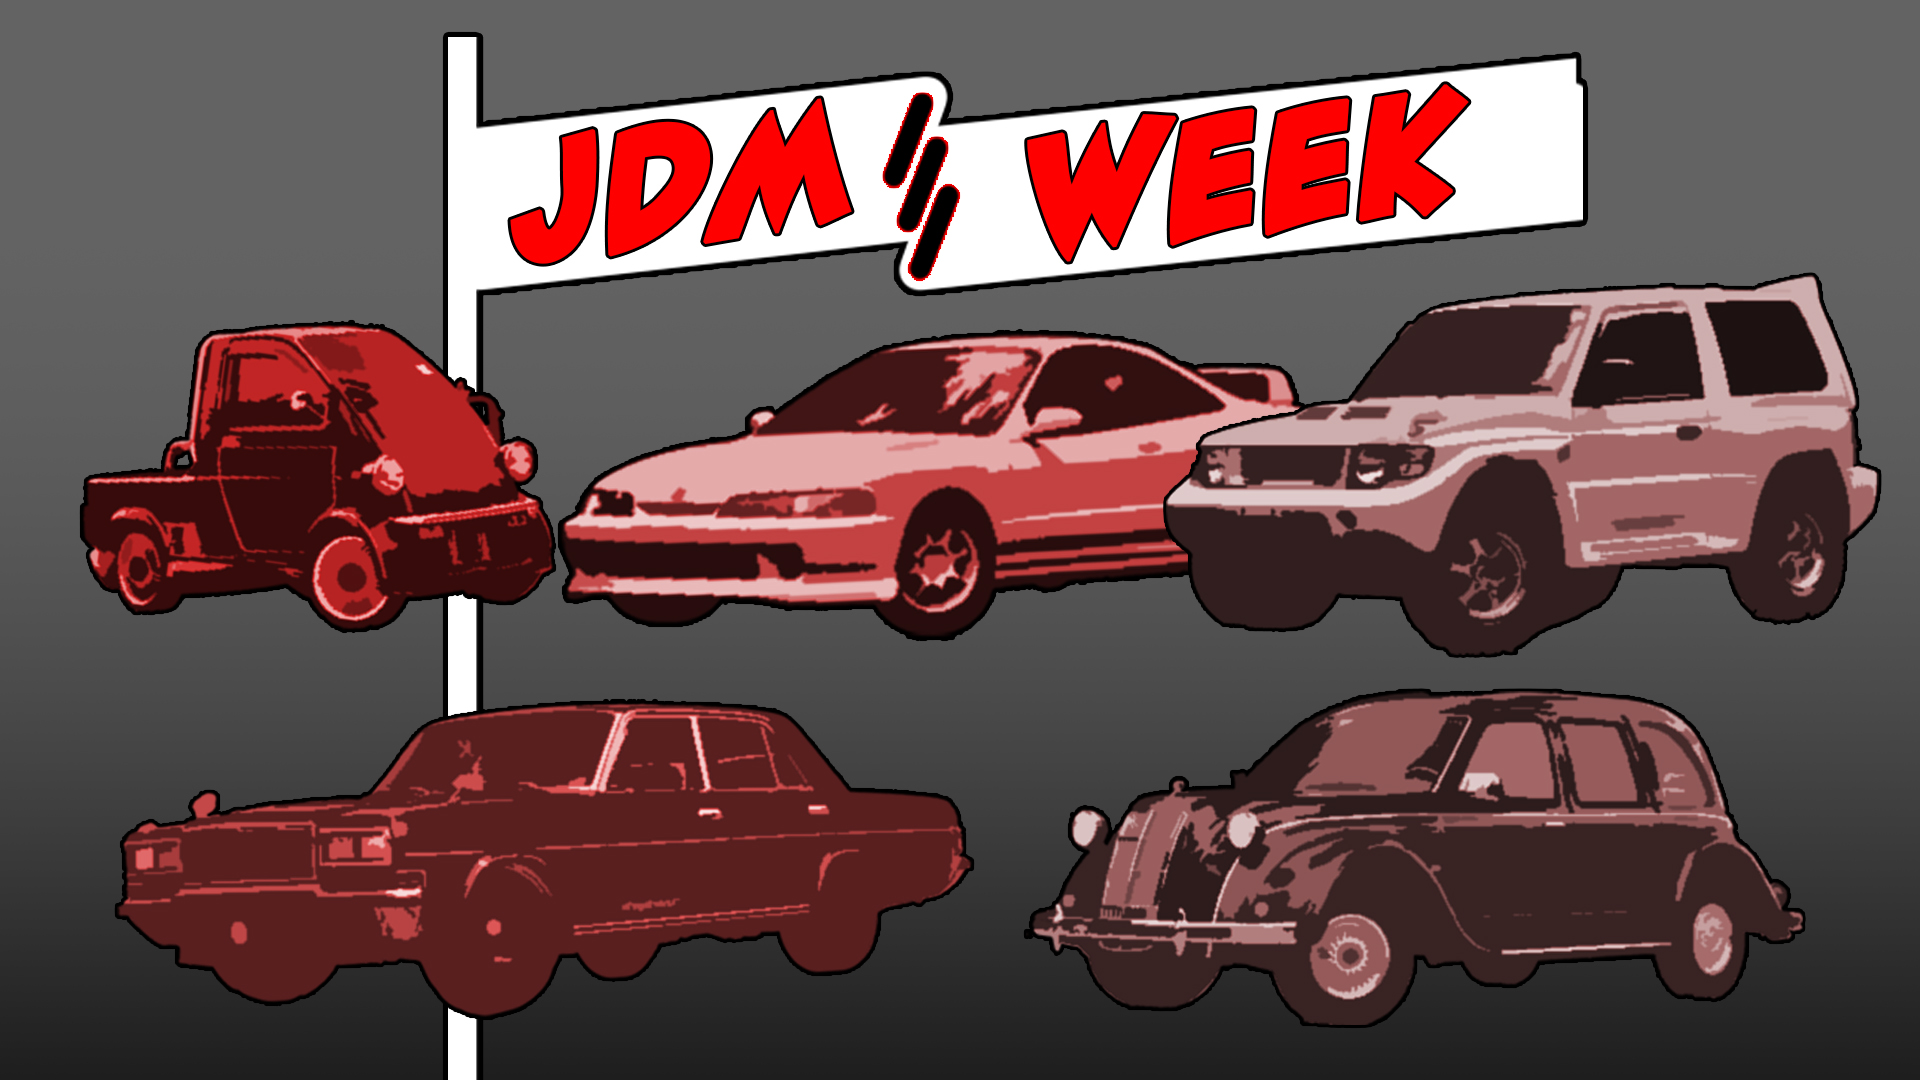 Welcome to JDM Week, Where I Drive Some of Japan’s Greatest and Weirdest Cars